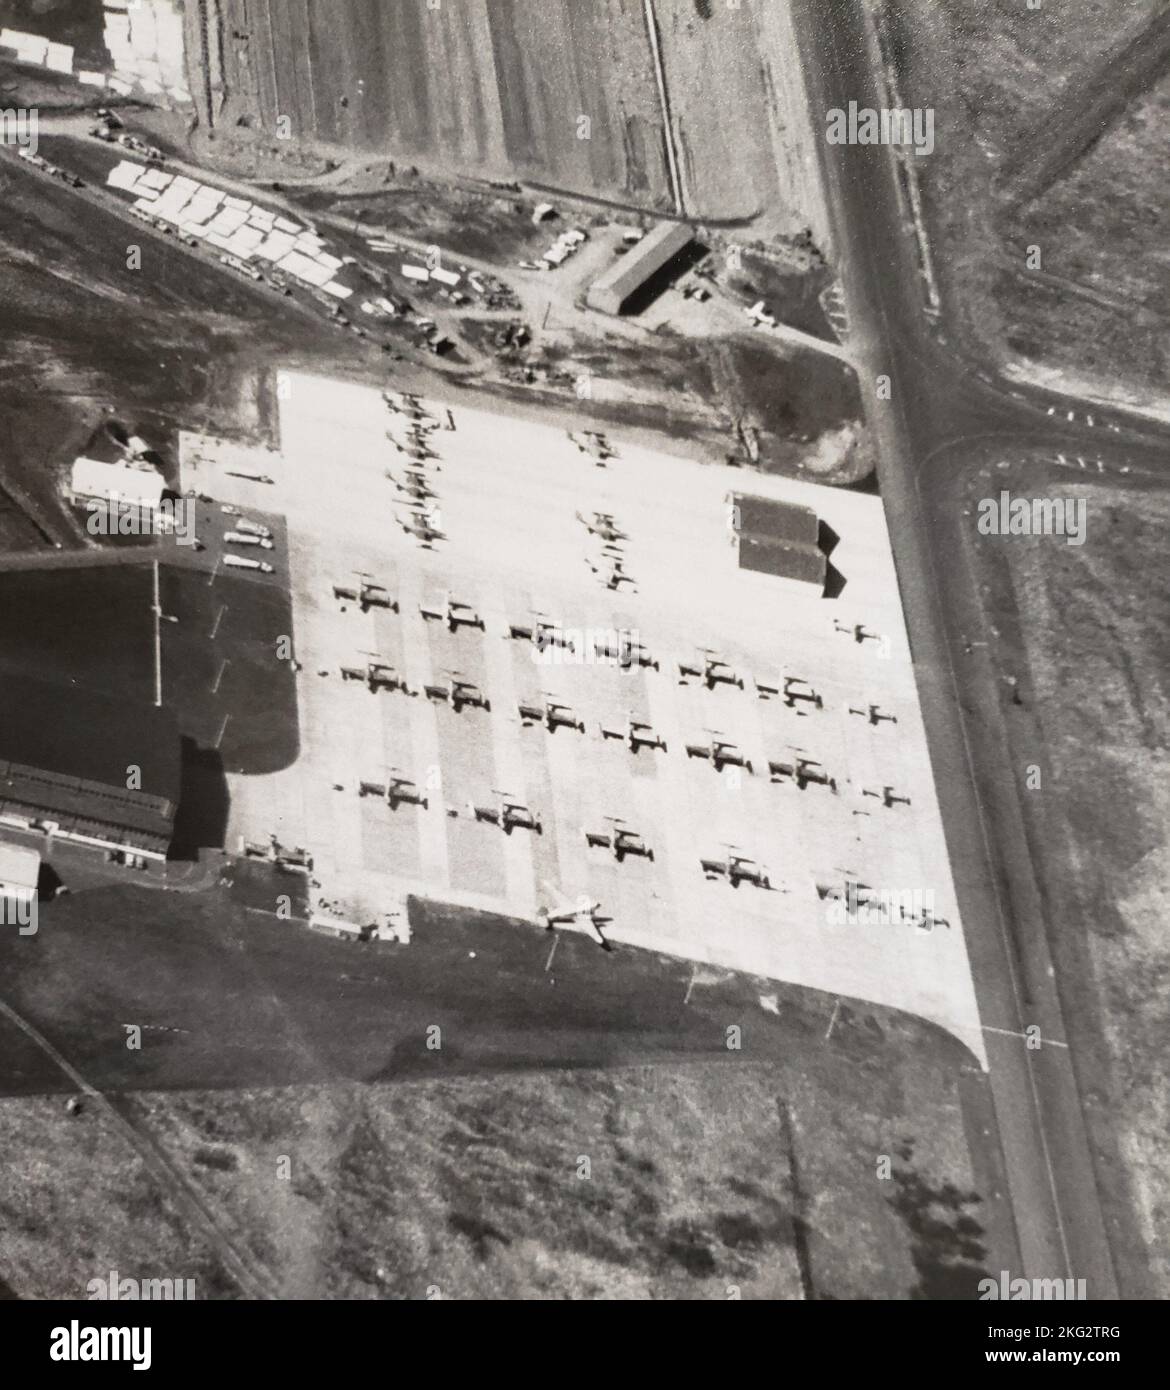 An aerial view of the Portland Air Force Base, Oregon Air National Guard Apron, home of the 142nd Fighter Group (Air Defense) circa 1962.  Present are 25 F-89J Scorpions (at least three appear to be painted in “ADC gray”), four T-33A jet trainers and one VC-47 transport.  Two single-aircraft alert shelters are seen at the upper right portion of the ramp, likely with alert F-89Js in them.  The long building at the top of the photograph is an Oregon Army National Guard aviation facility, soon to be removed as the Reserve Apron construction was completed.  (142nd Wing History Archive) Stock Photo